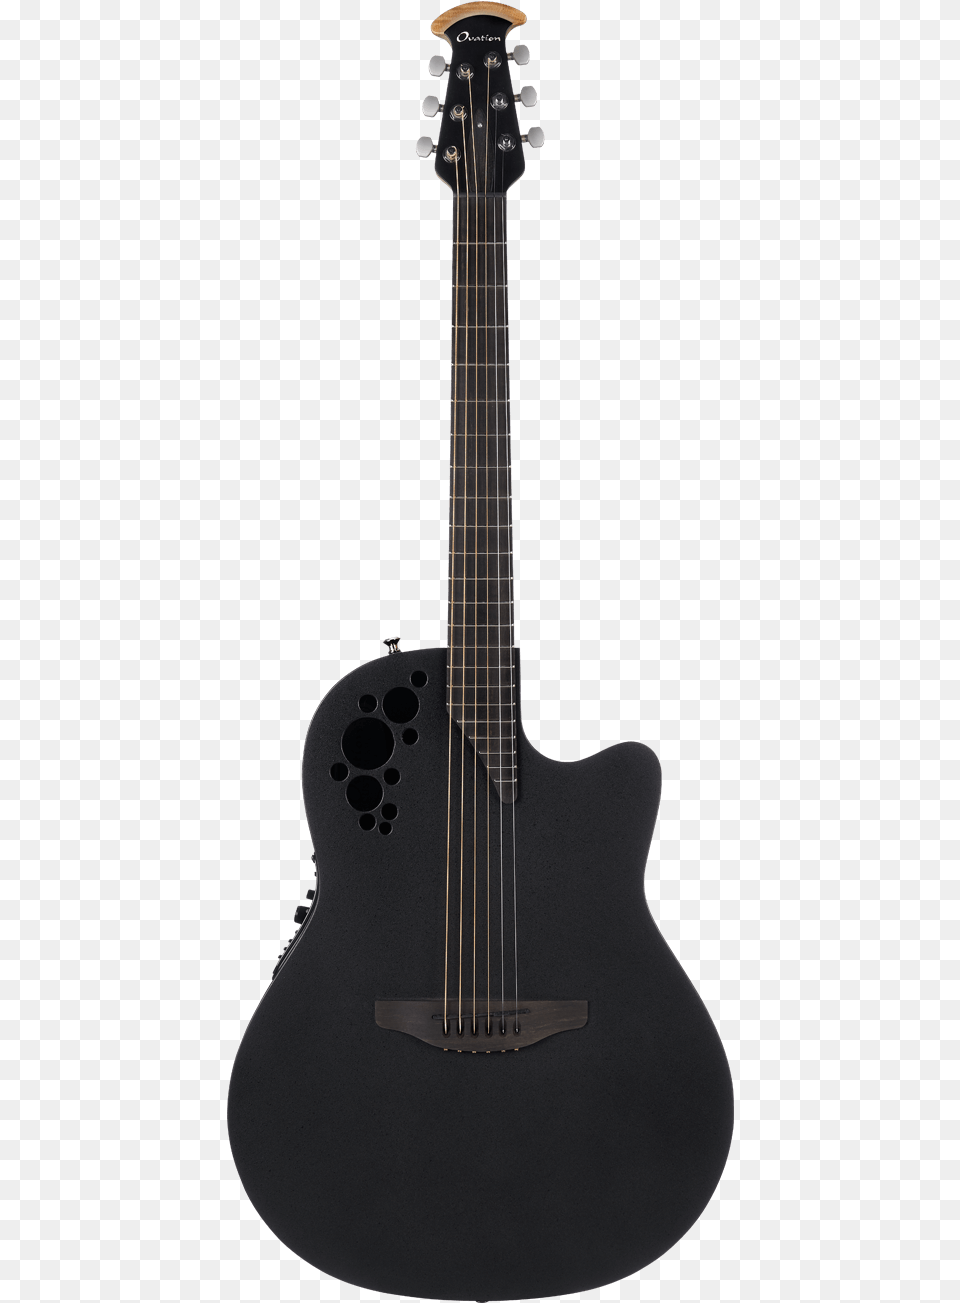 American Lx Limited Black Guitar, Bass Guitar, Musical Instrument Png